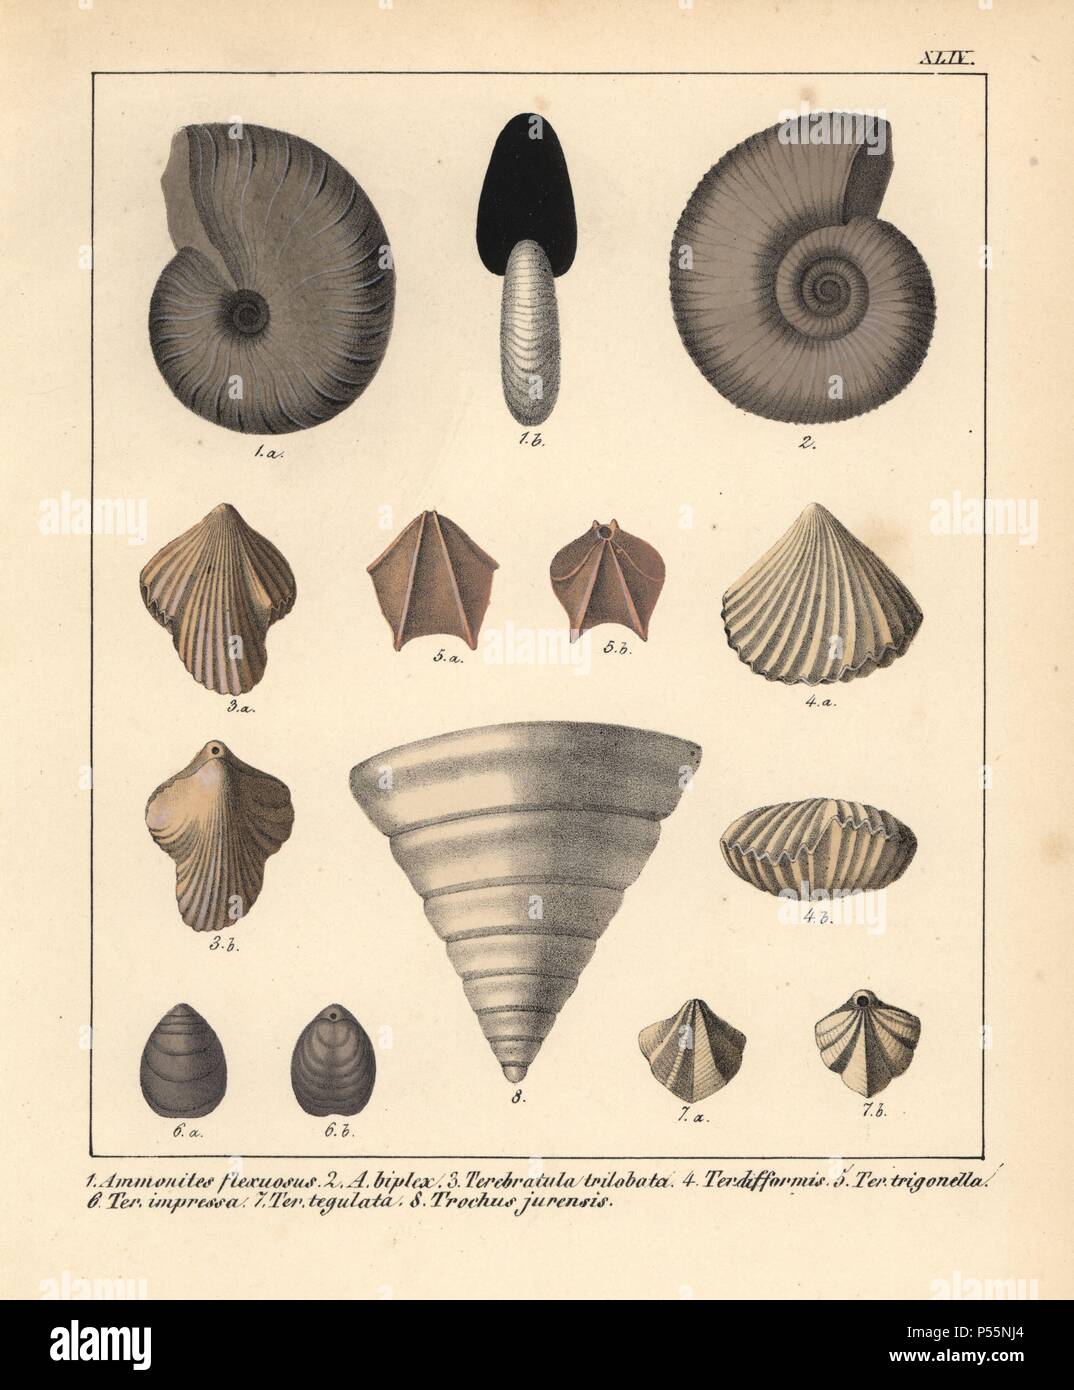 Ammonites flexuosus, A. biplex, Terebratula trilobata, T. difformis, T. trigonella, T. impressa, T. tegulata and Trochus jurensis. Handcoloured lithograph by an unknown artist from Dr. F.A. Schmidt's 'Petrefactenbuch,' published in Stuttgart, Germany, 1855 by Verlag von Krais & Hoffmann. Dr. Schmidt's 'Book of Petrification' introduced fossils and palaeontology to both the specialist and general reader. Stock Photo